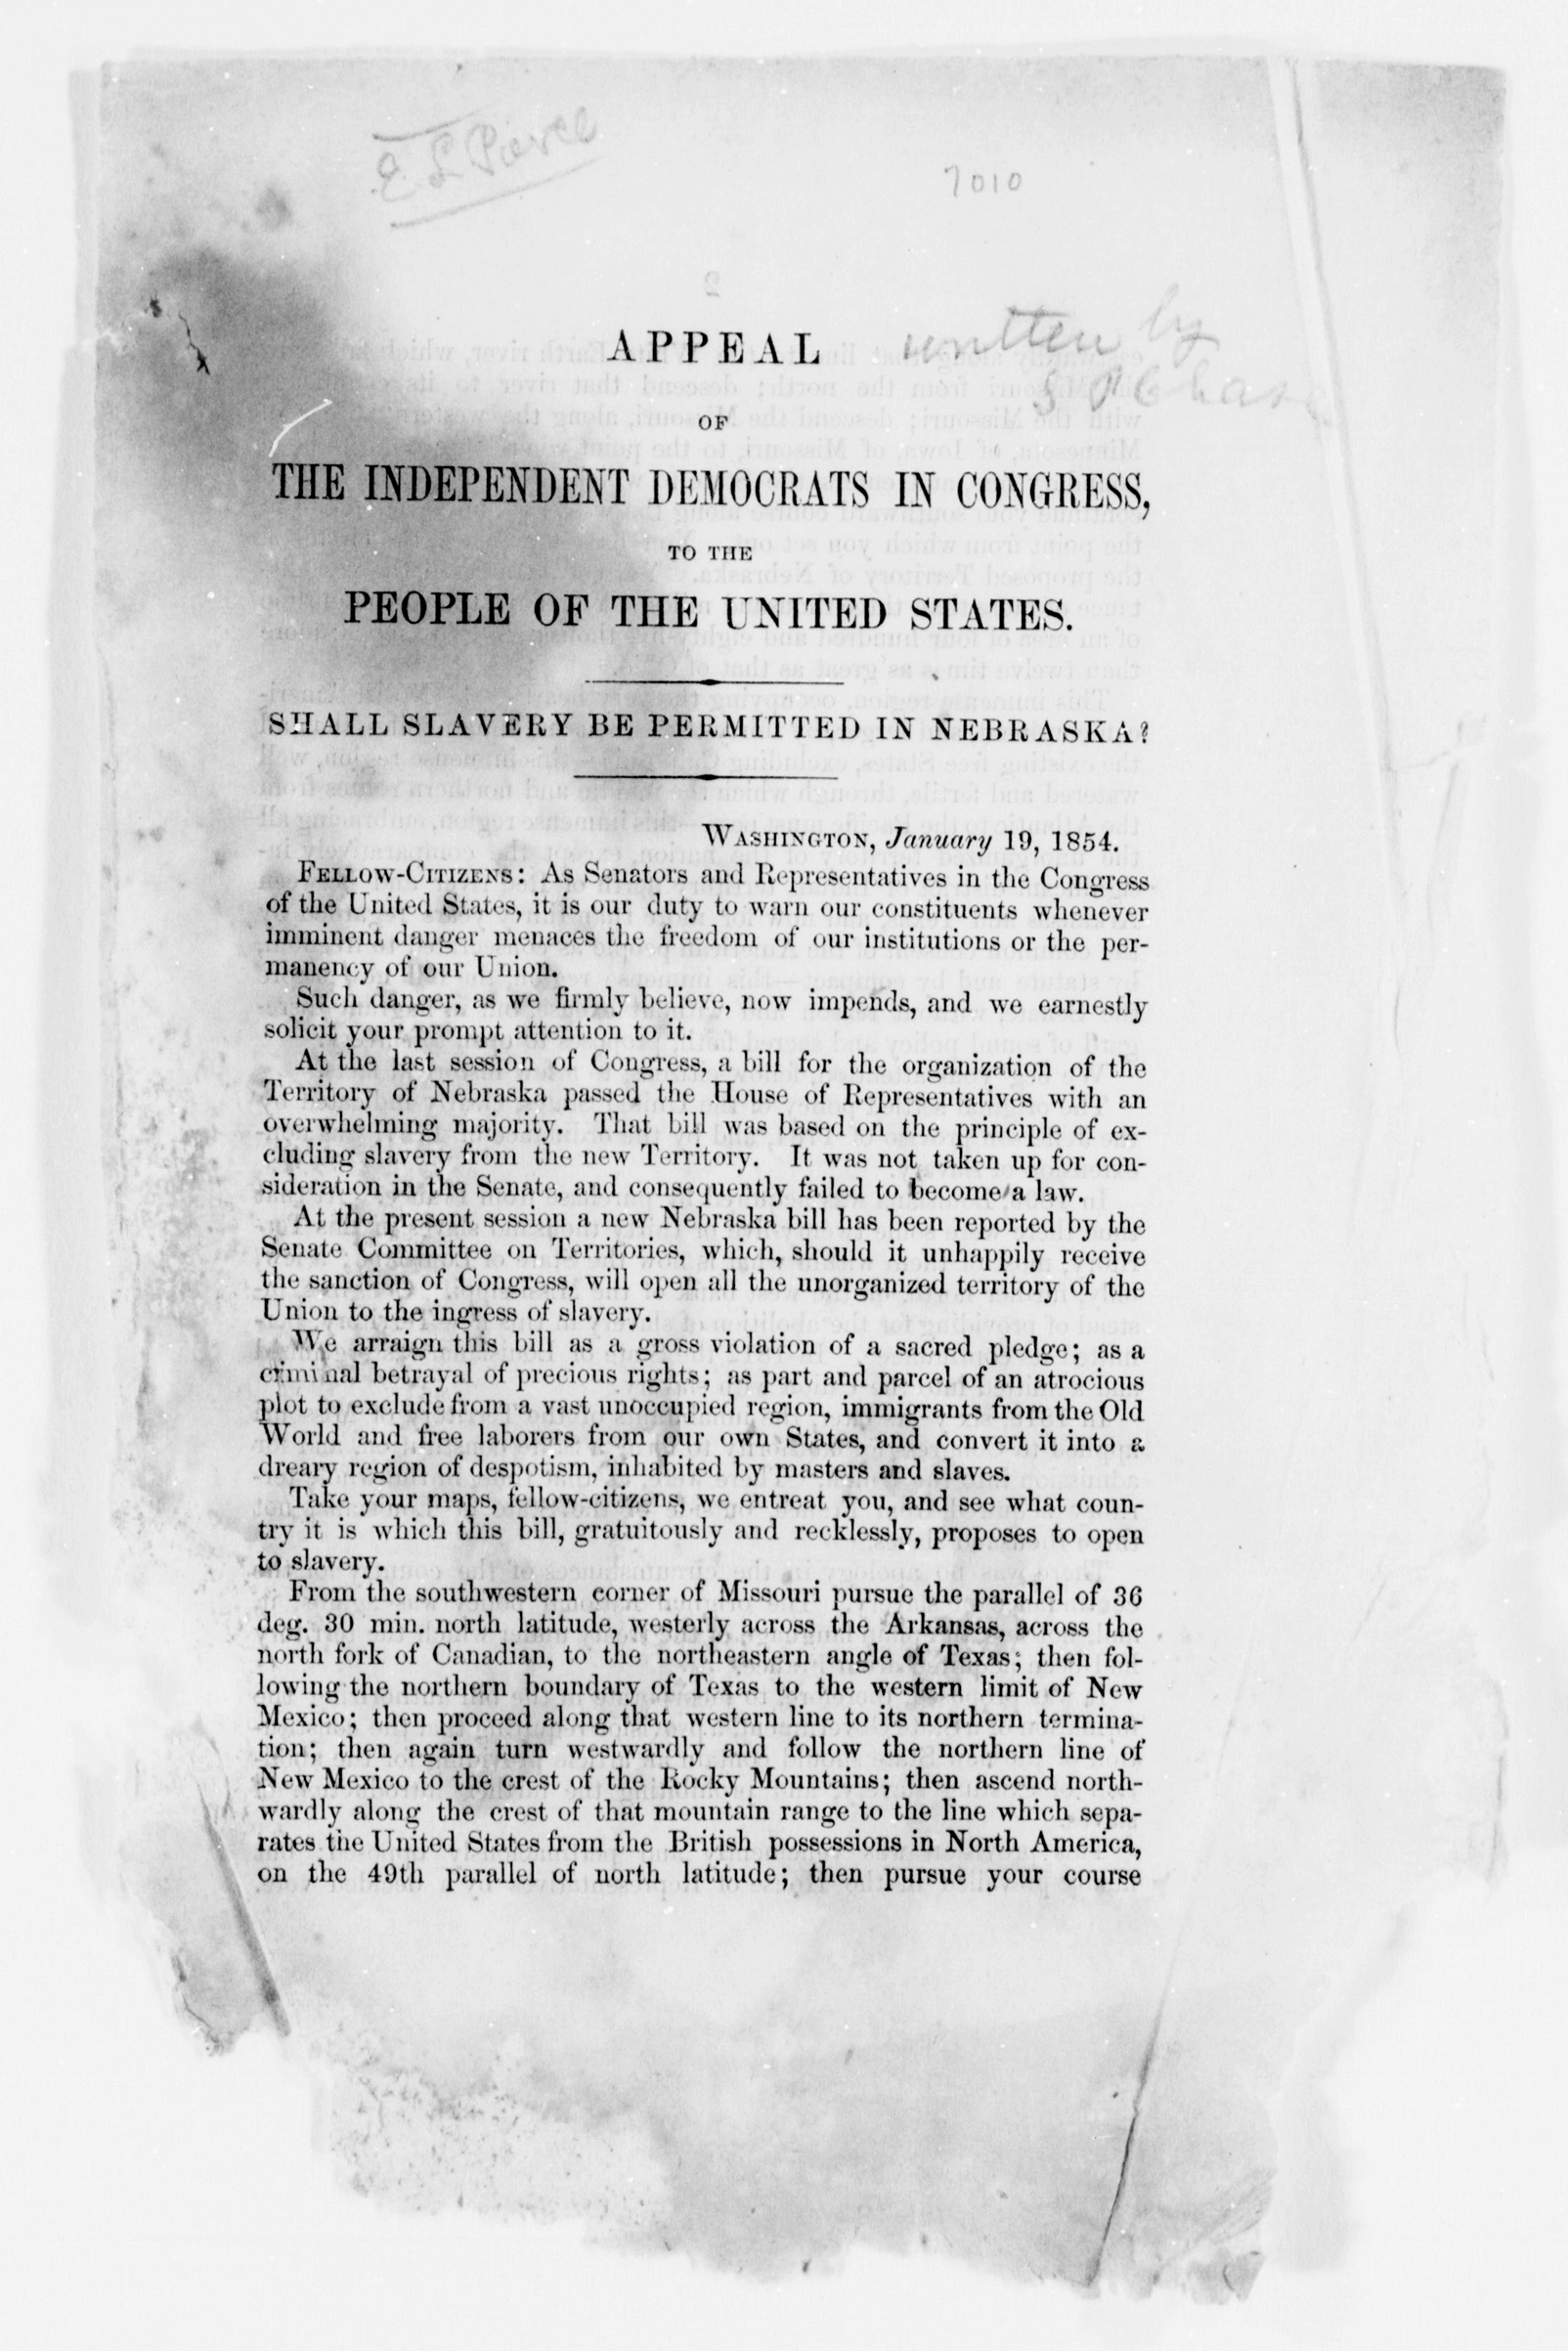 Appeal of the Independent Democrats in Congress to the People of the United States, 1854.